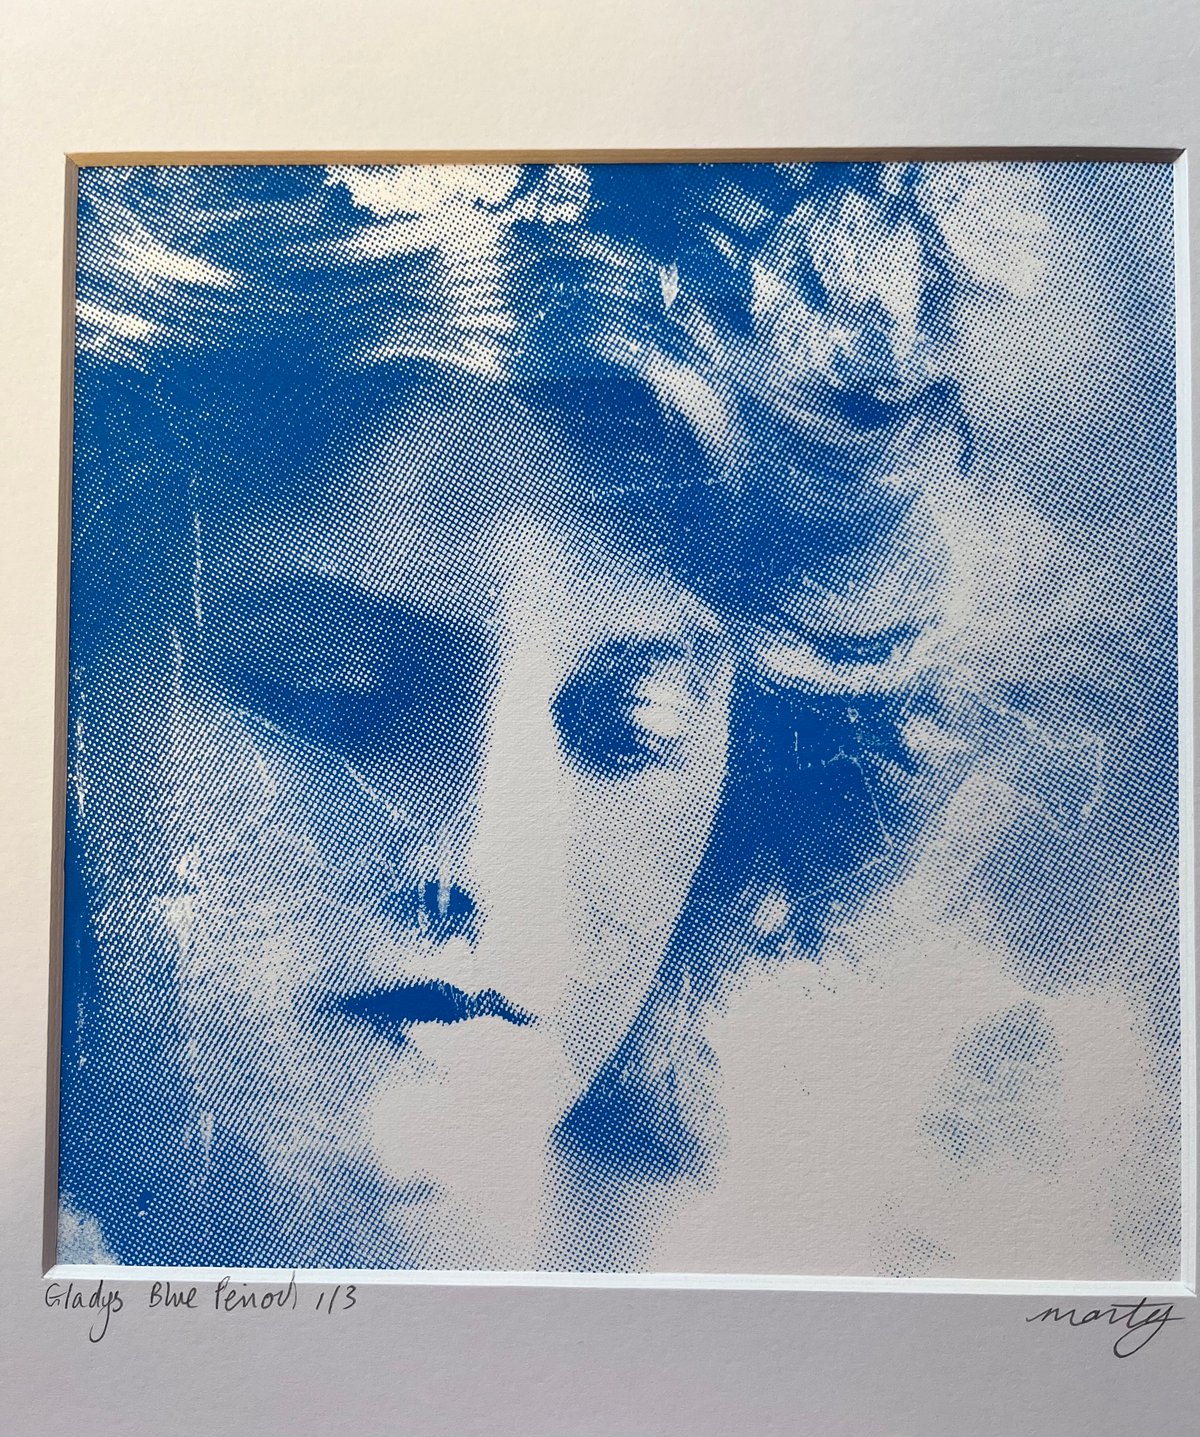 Image of Gladys Blue Period